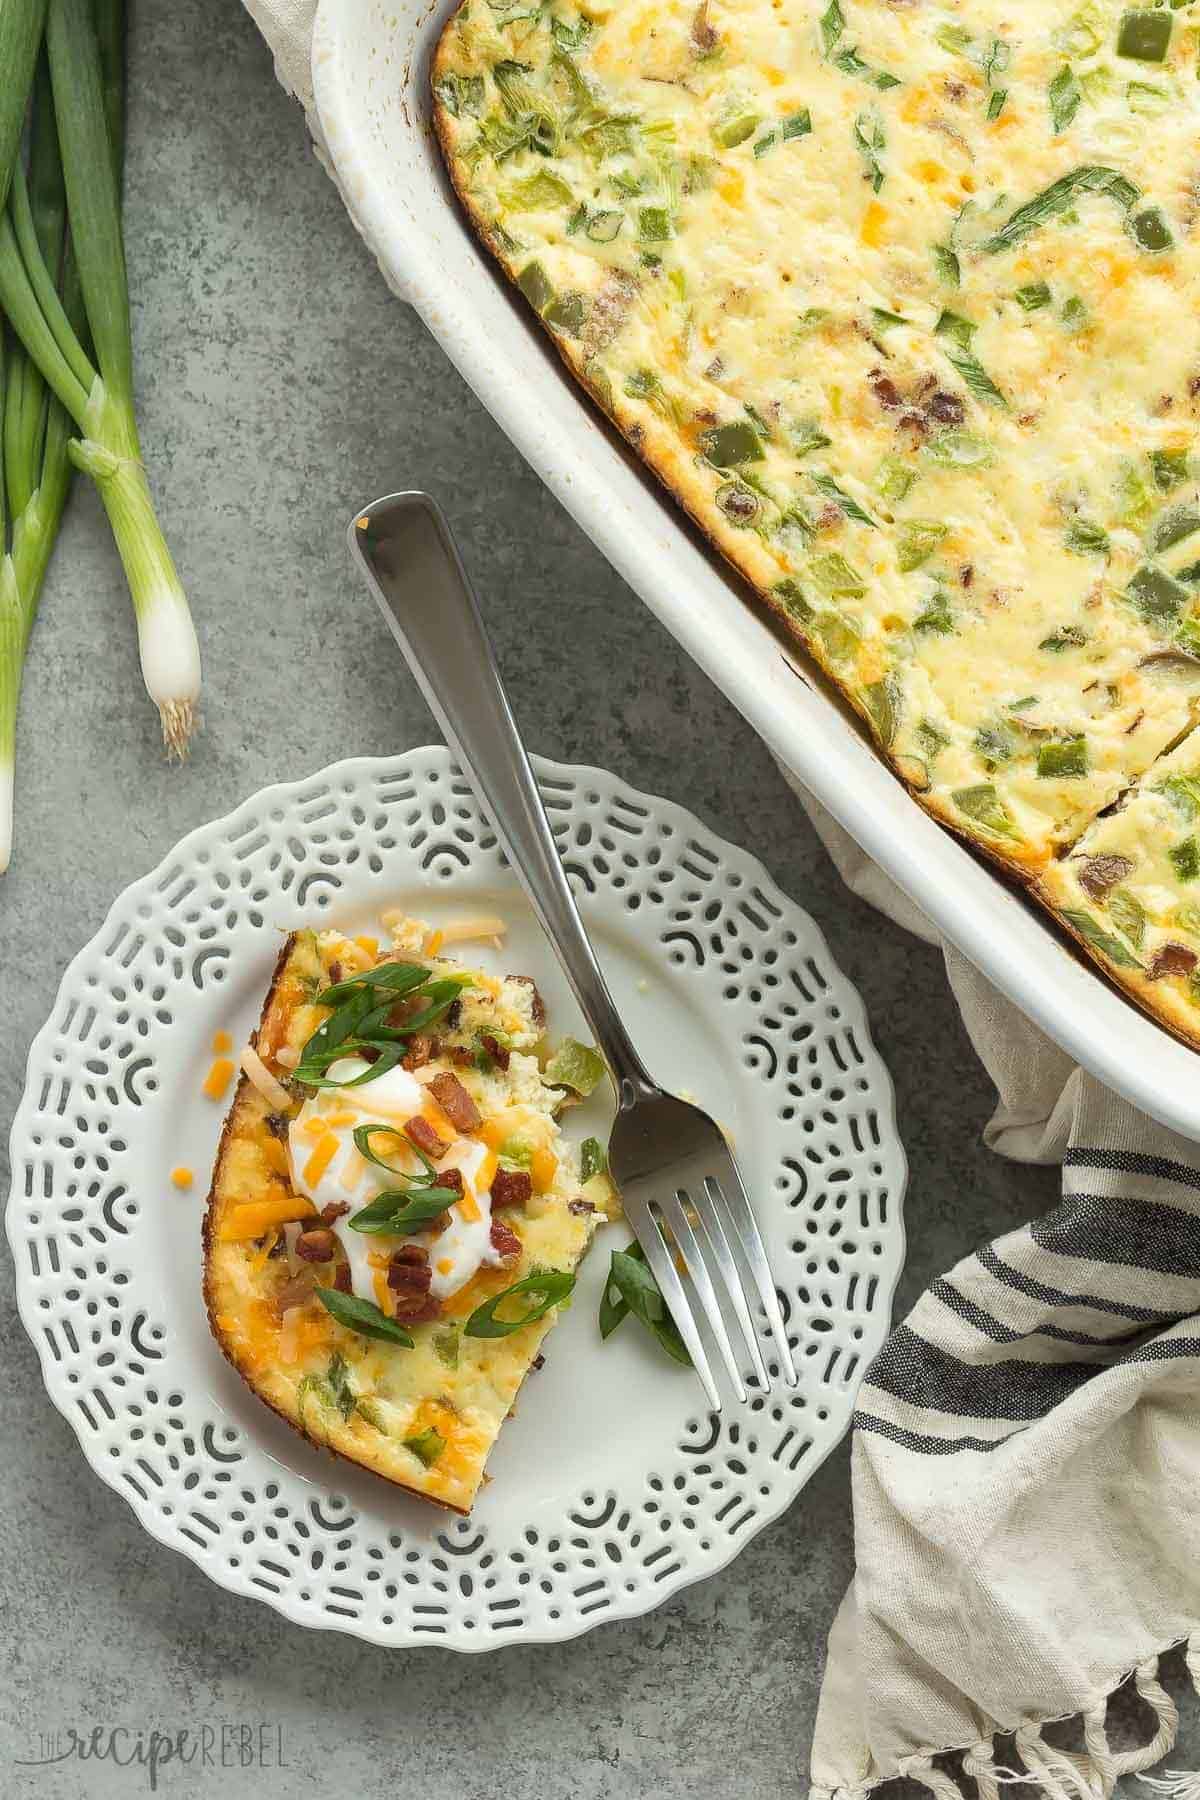 This Loaded Baked Potato Breakfast Casserole has all of your favorites: potatoes, bacon, eggs, sour cream, cheese, peppers and onions! It's easy to make ahead and is a great healthy breakfast option for the holidays!